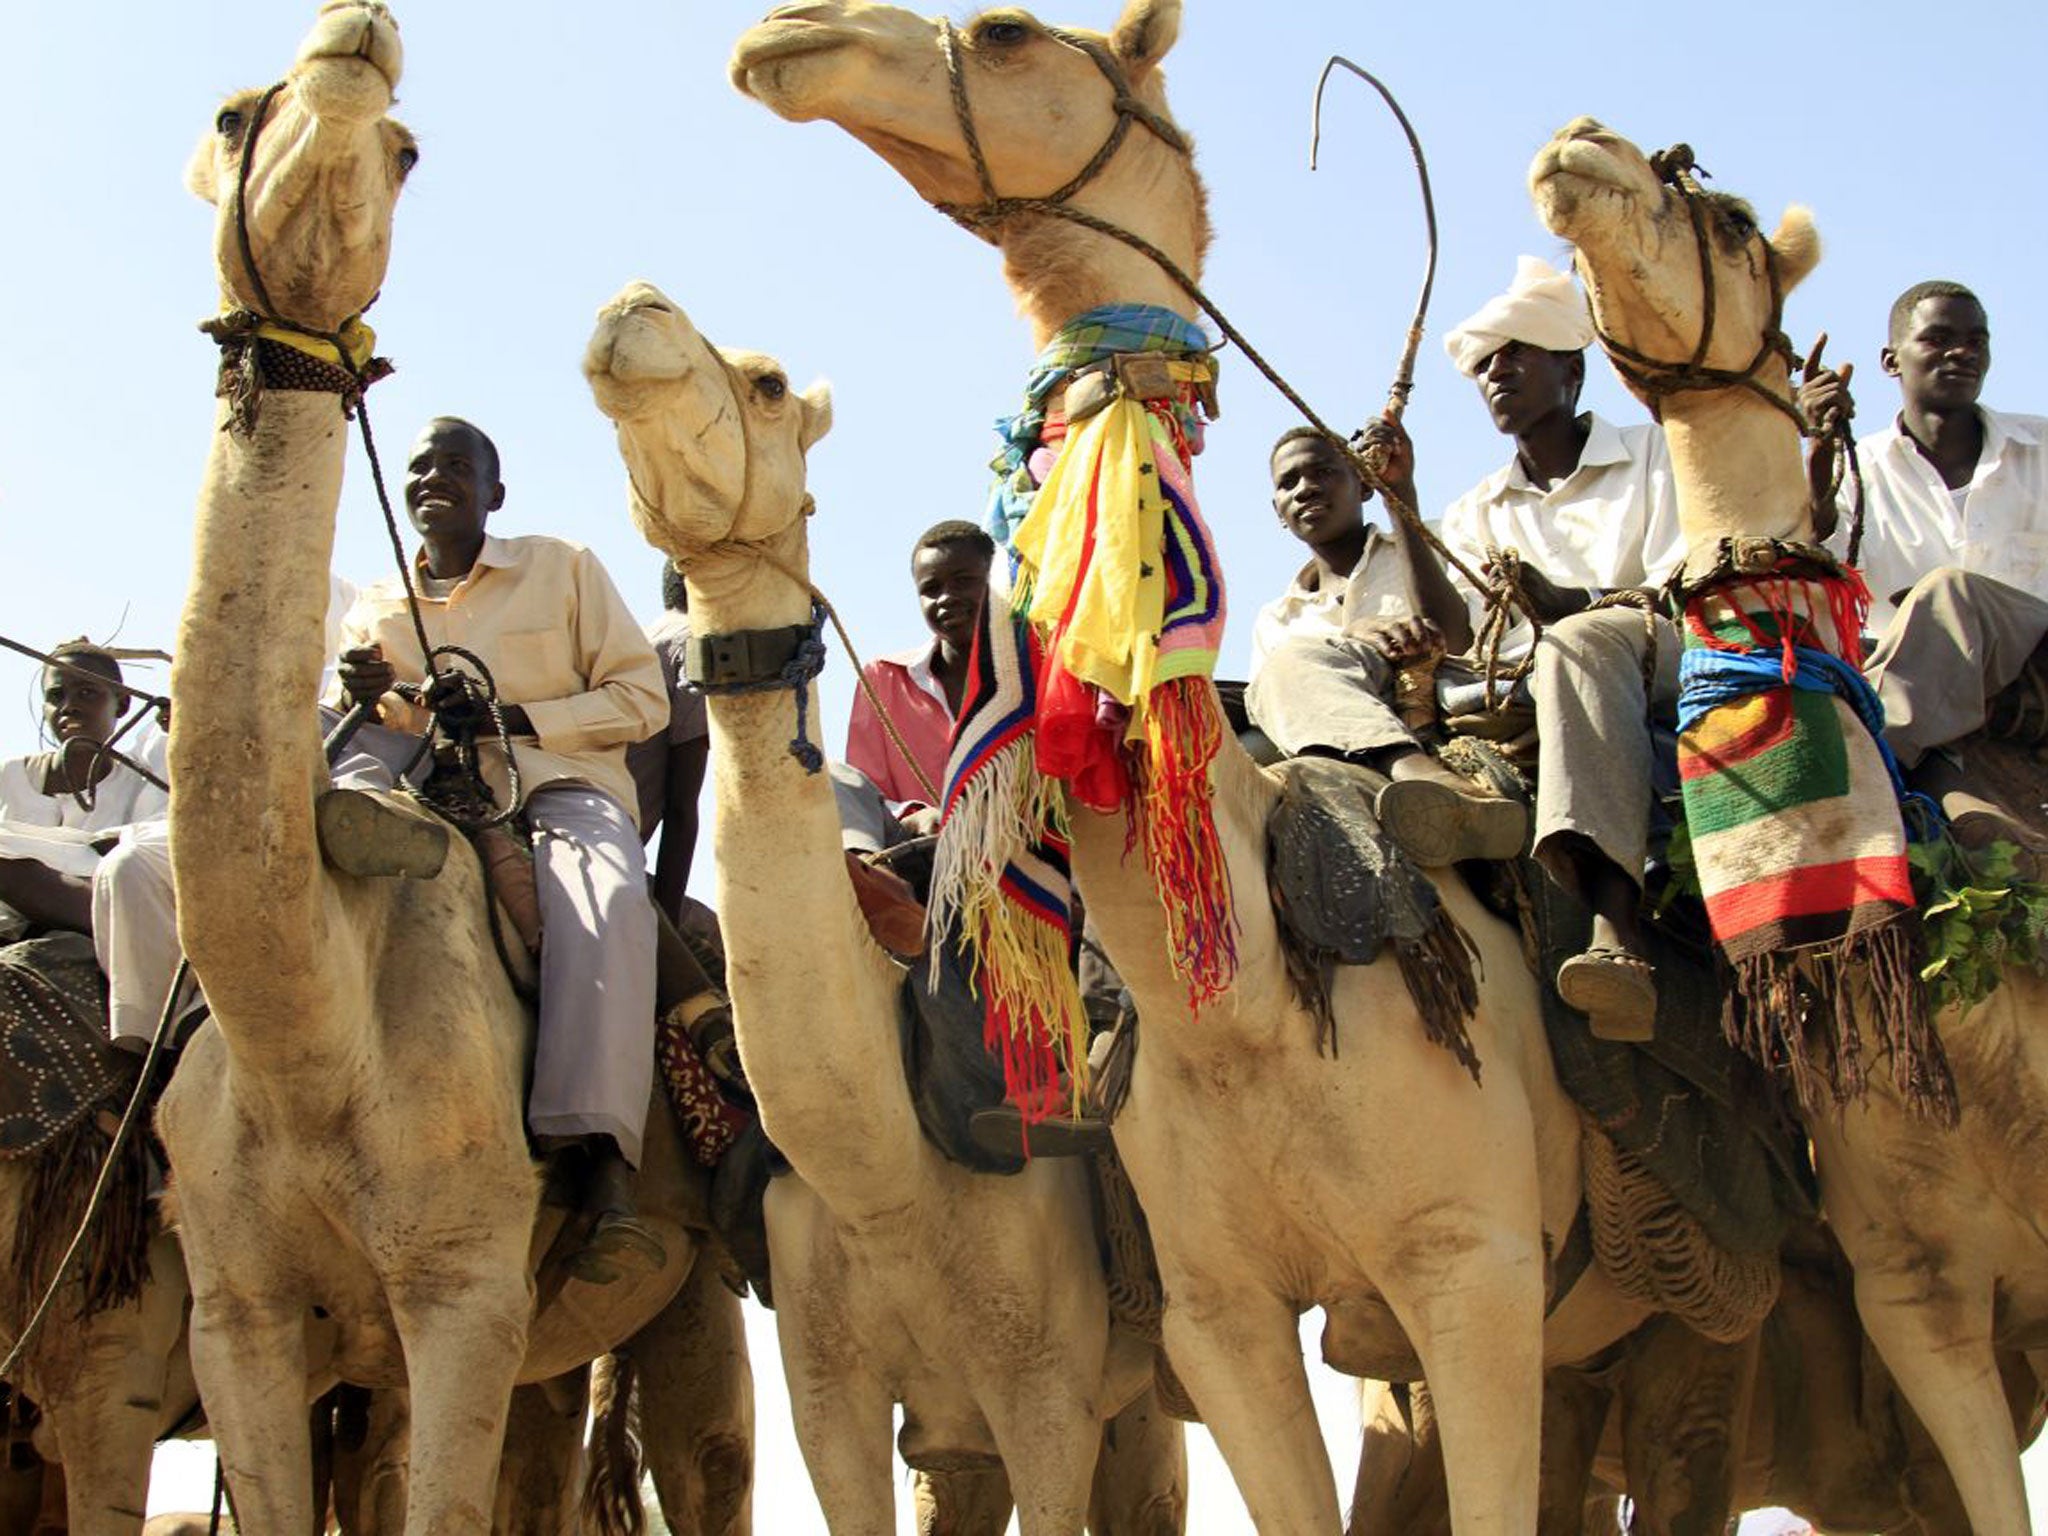 Ship of the desert: Camels of Arabia suspected of carrying deadly virus  cargo | The Independent | The Independent